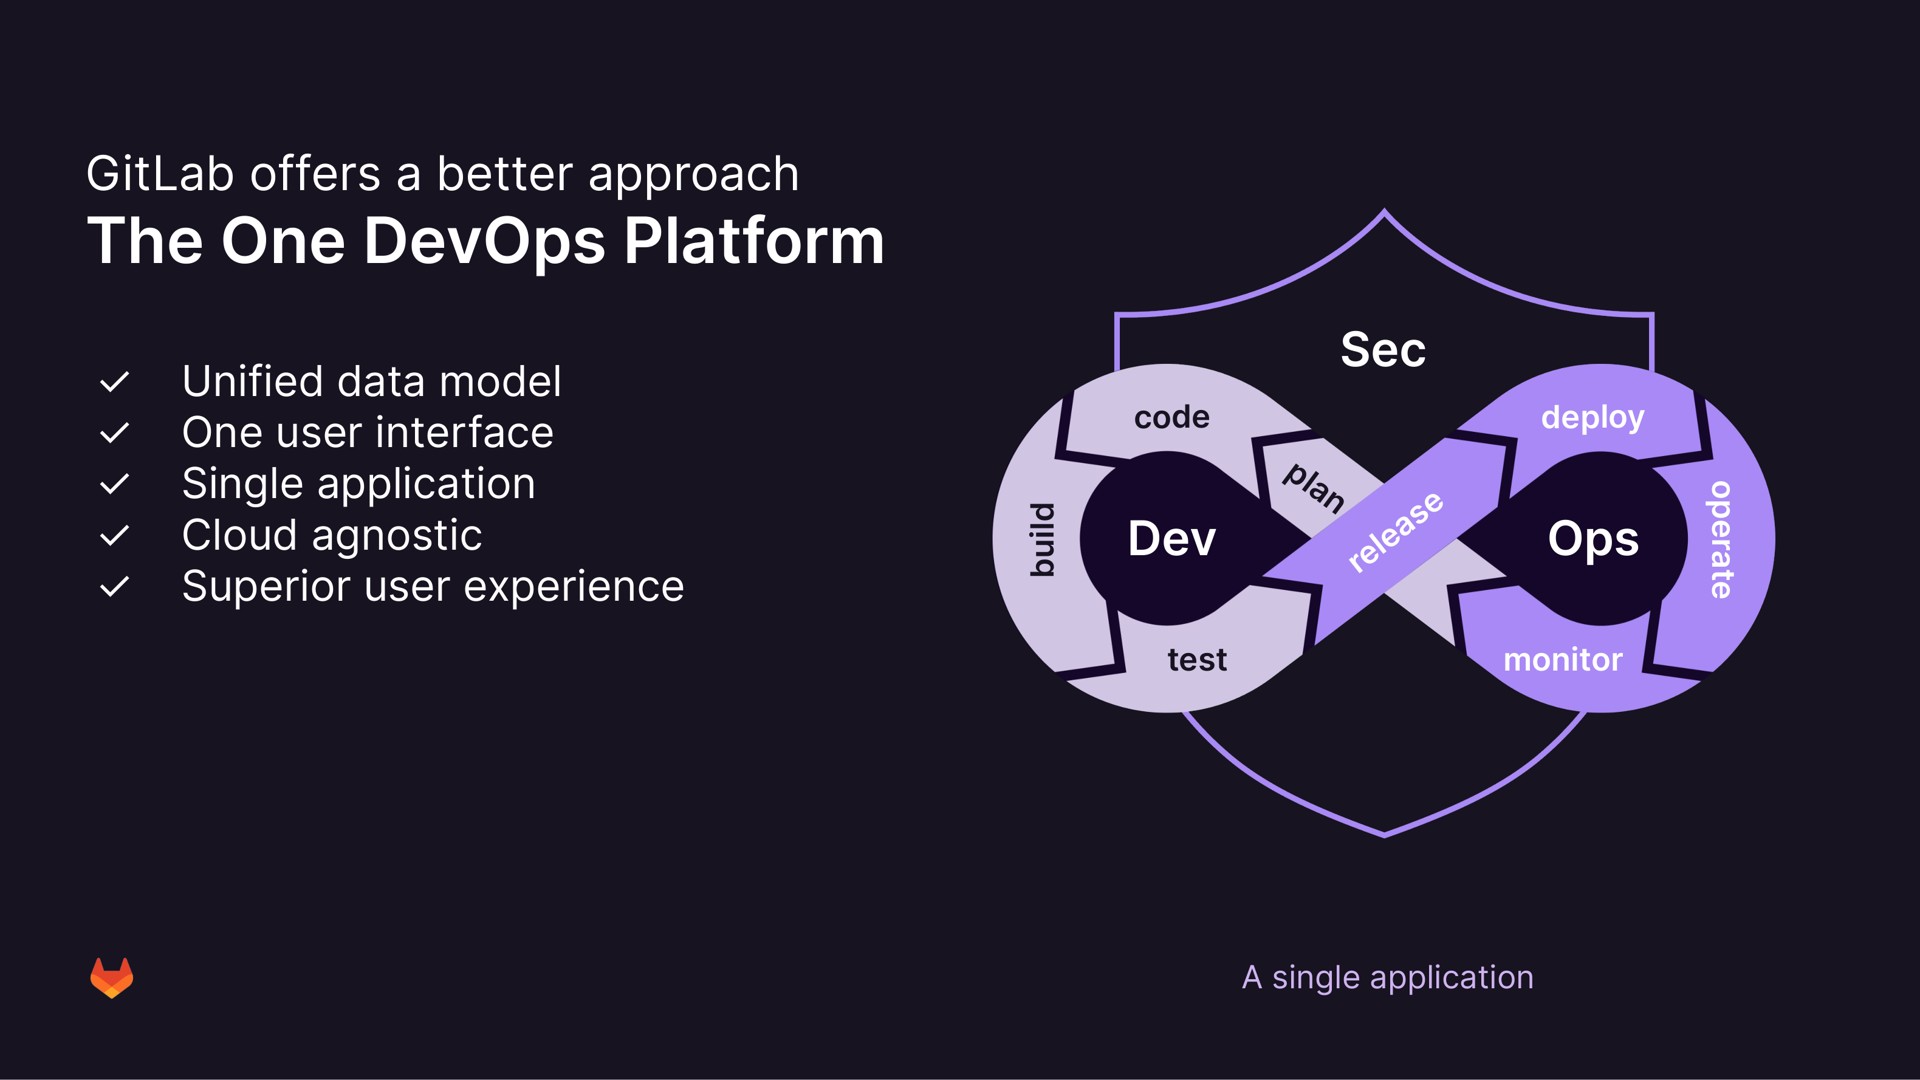 the one platform offers a better approach unified data model user interface single application cloud agnostic superior user experience sec dev | GitLab